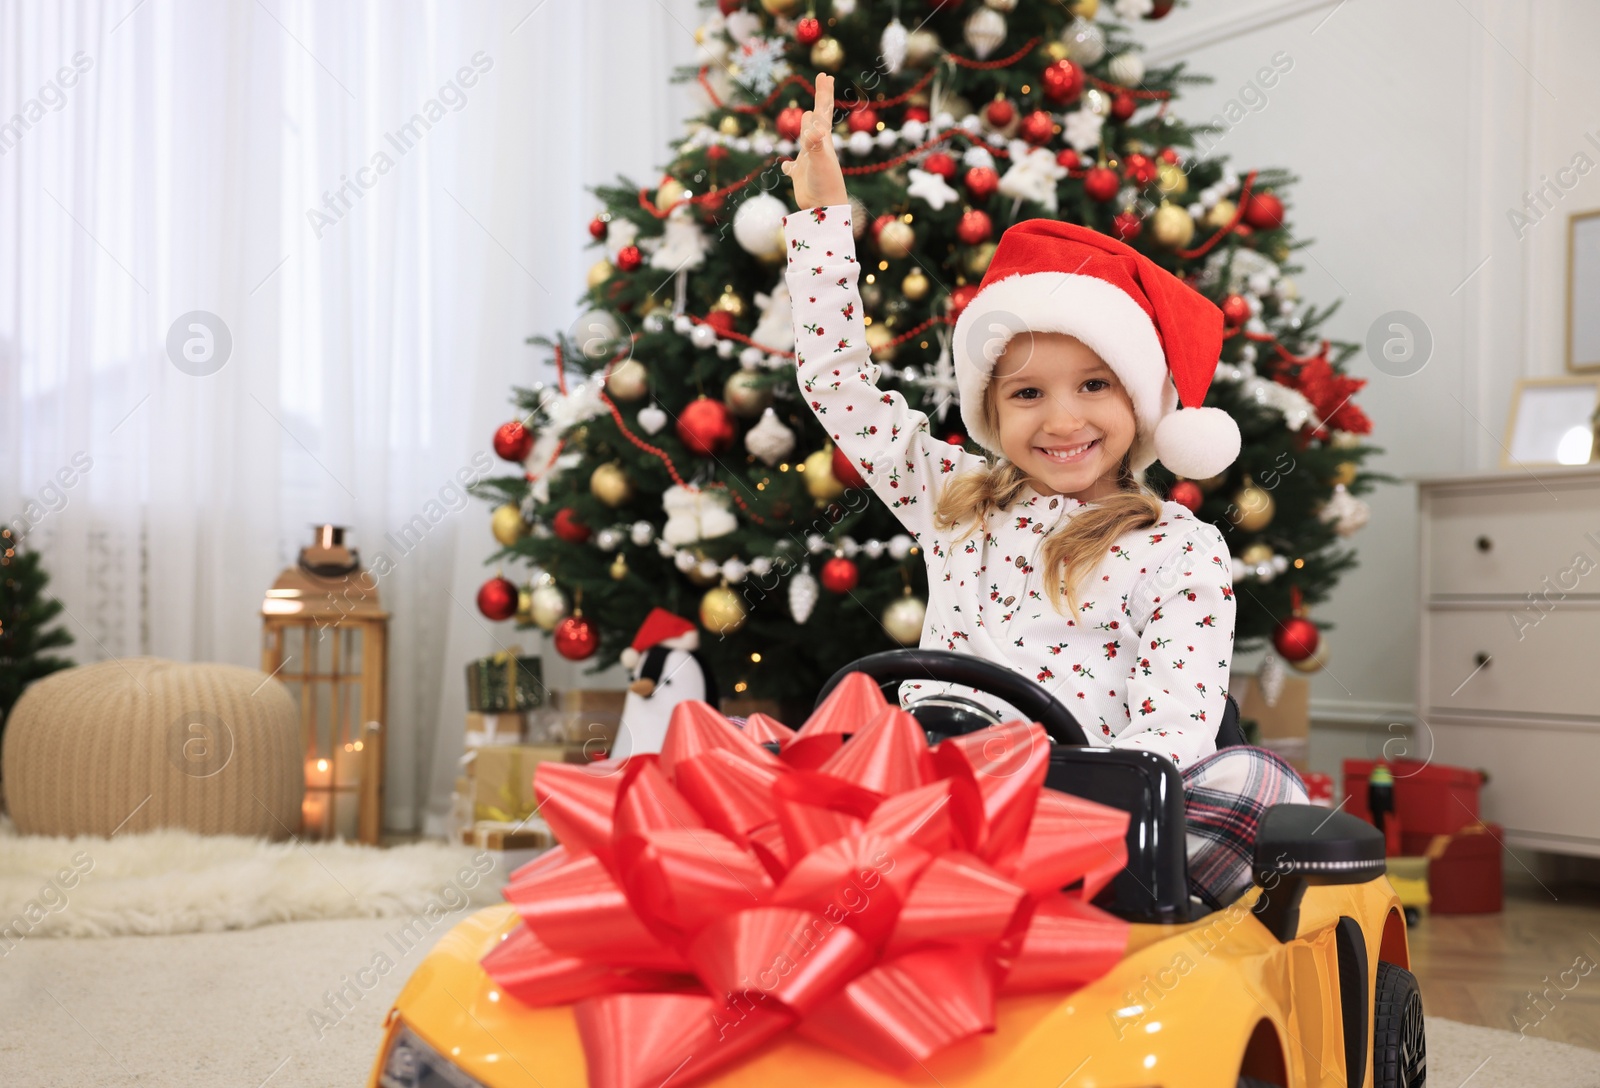 Photo of Cute little girl driving toy car in room decorated for Christmas